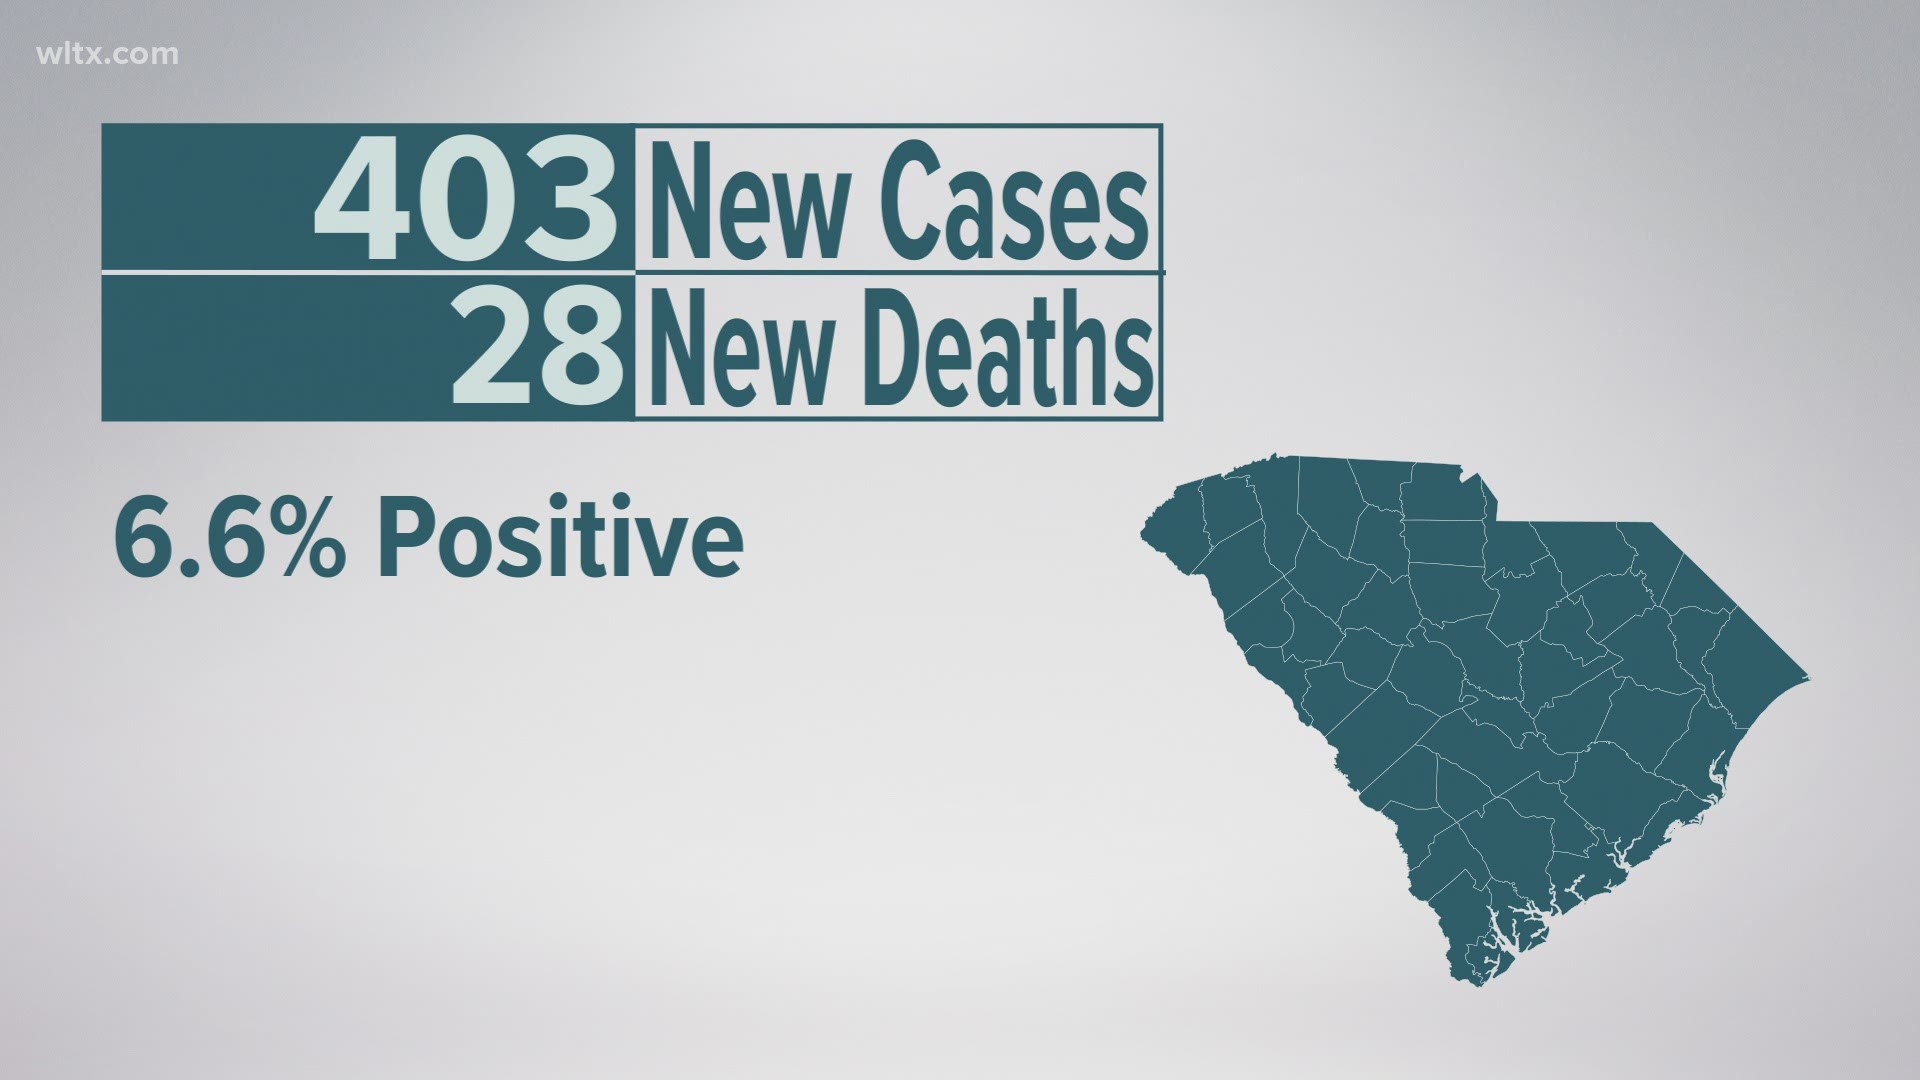 There were 403 new confirmed cases of COVID-19 in the latest data.